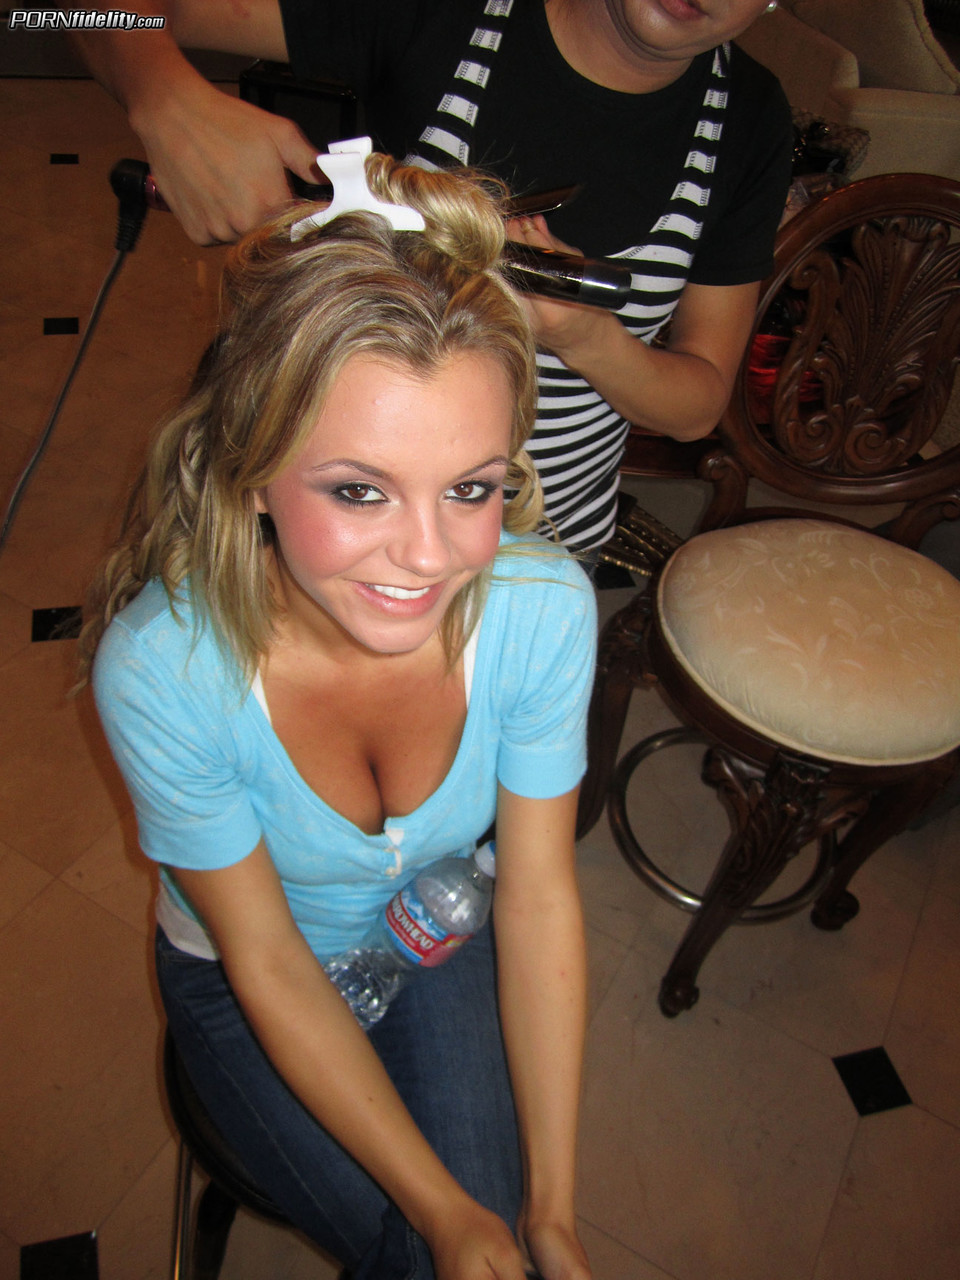 Attractive women Bree Olson & Kelly Madison strip together and pose for camera 色情照片 #425364725